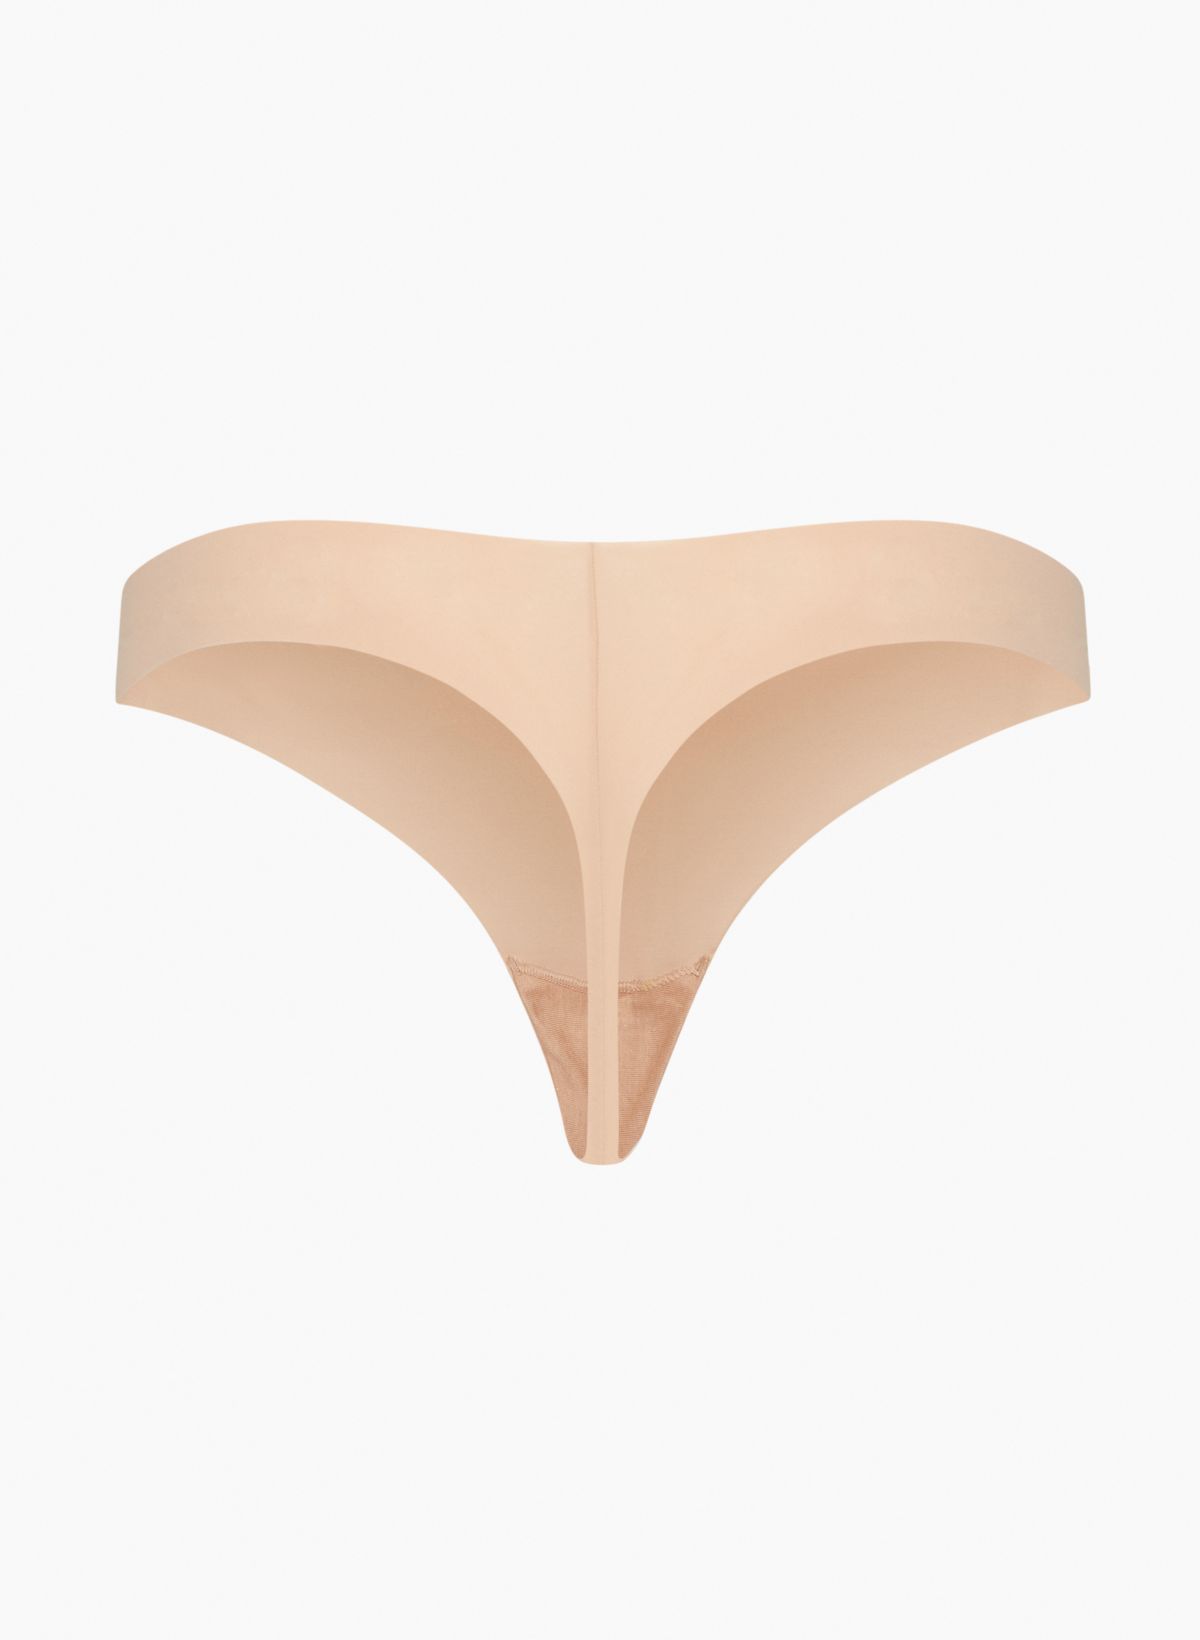 Buy aimn INVISIBLE THONG 3-PACK - Underwear – 20,00 USD at aimn.com – AIMN  NZ